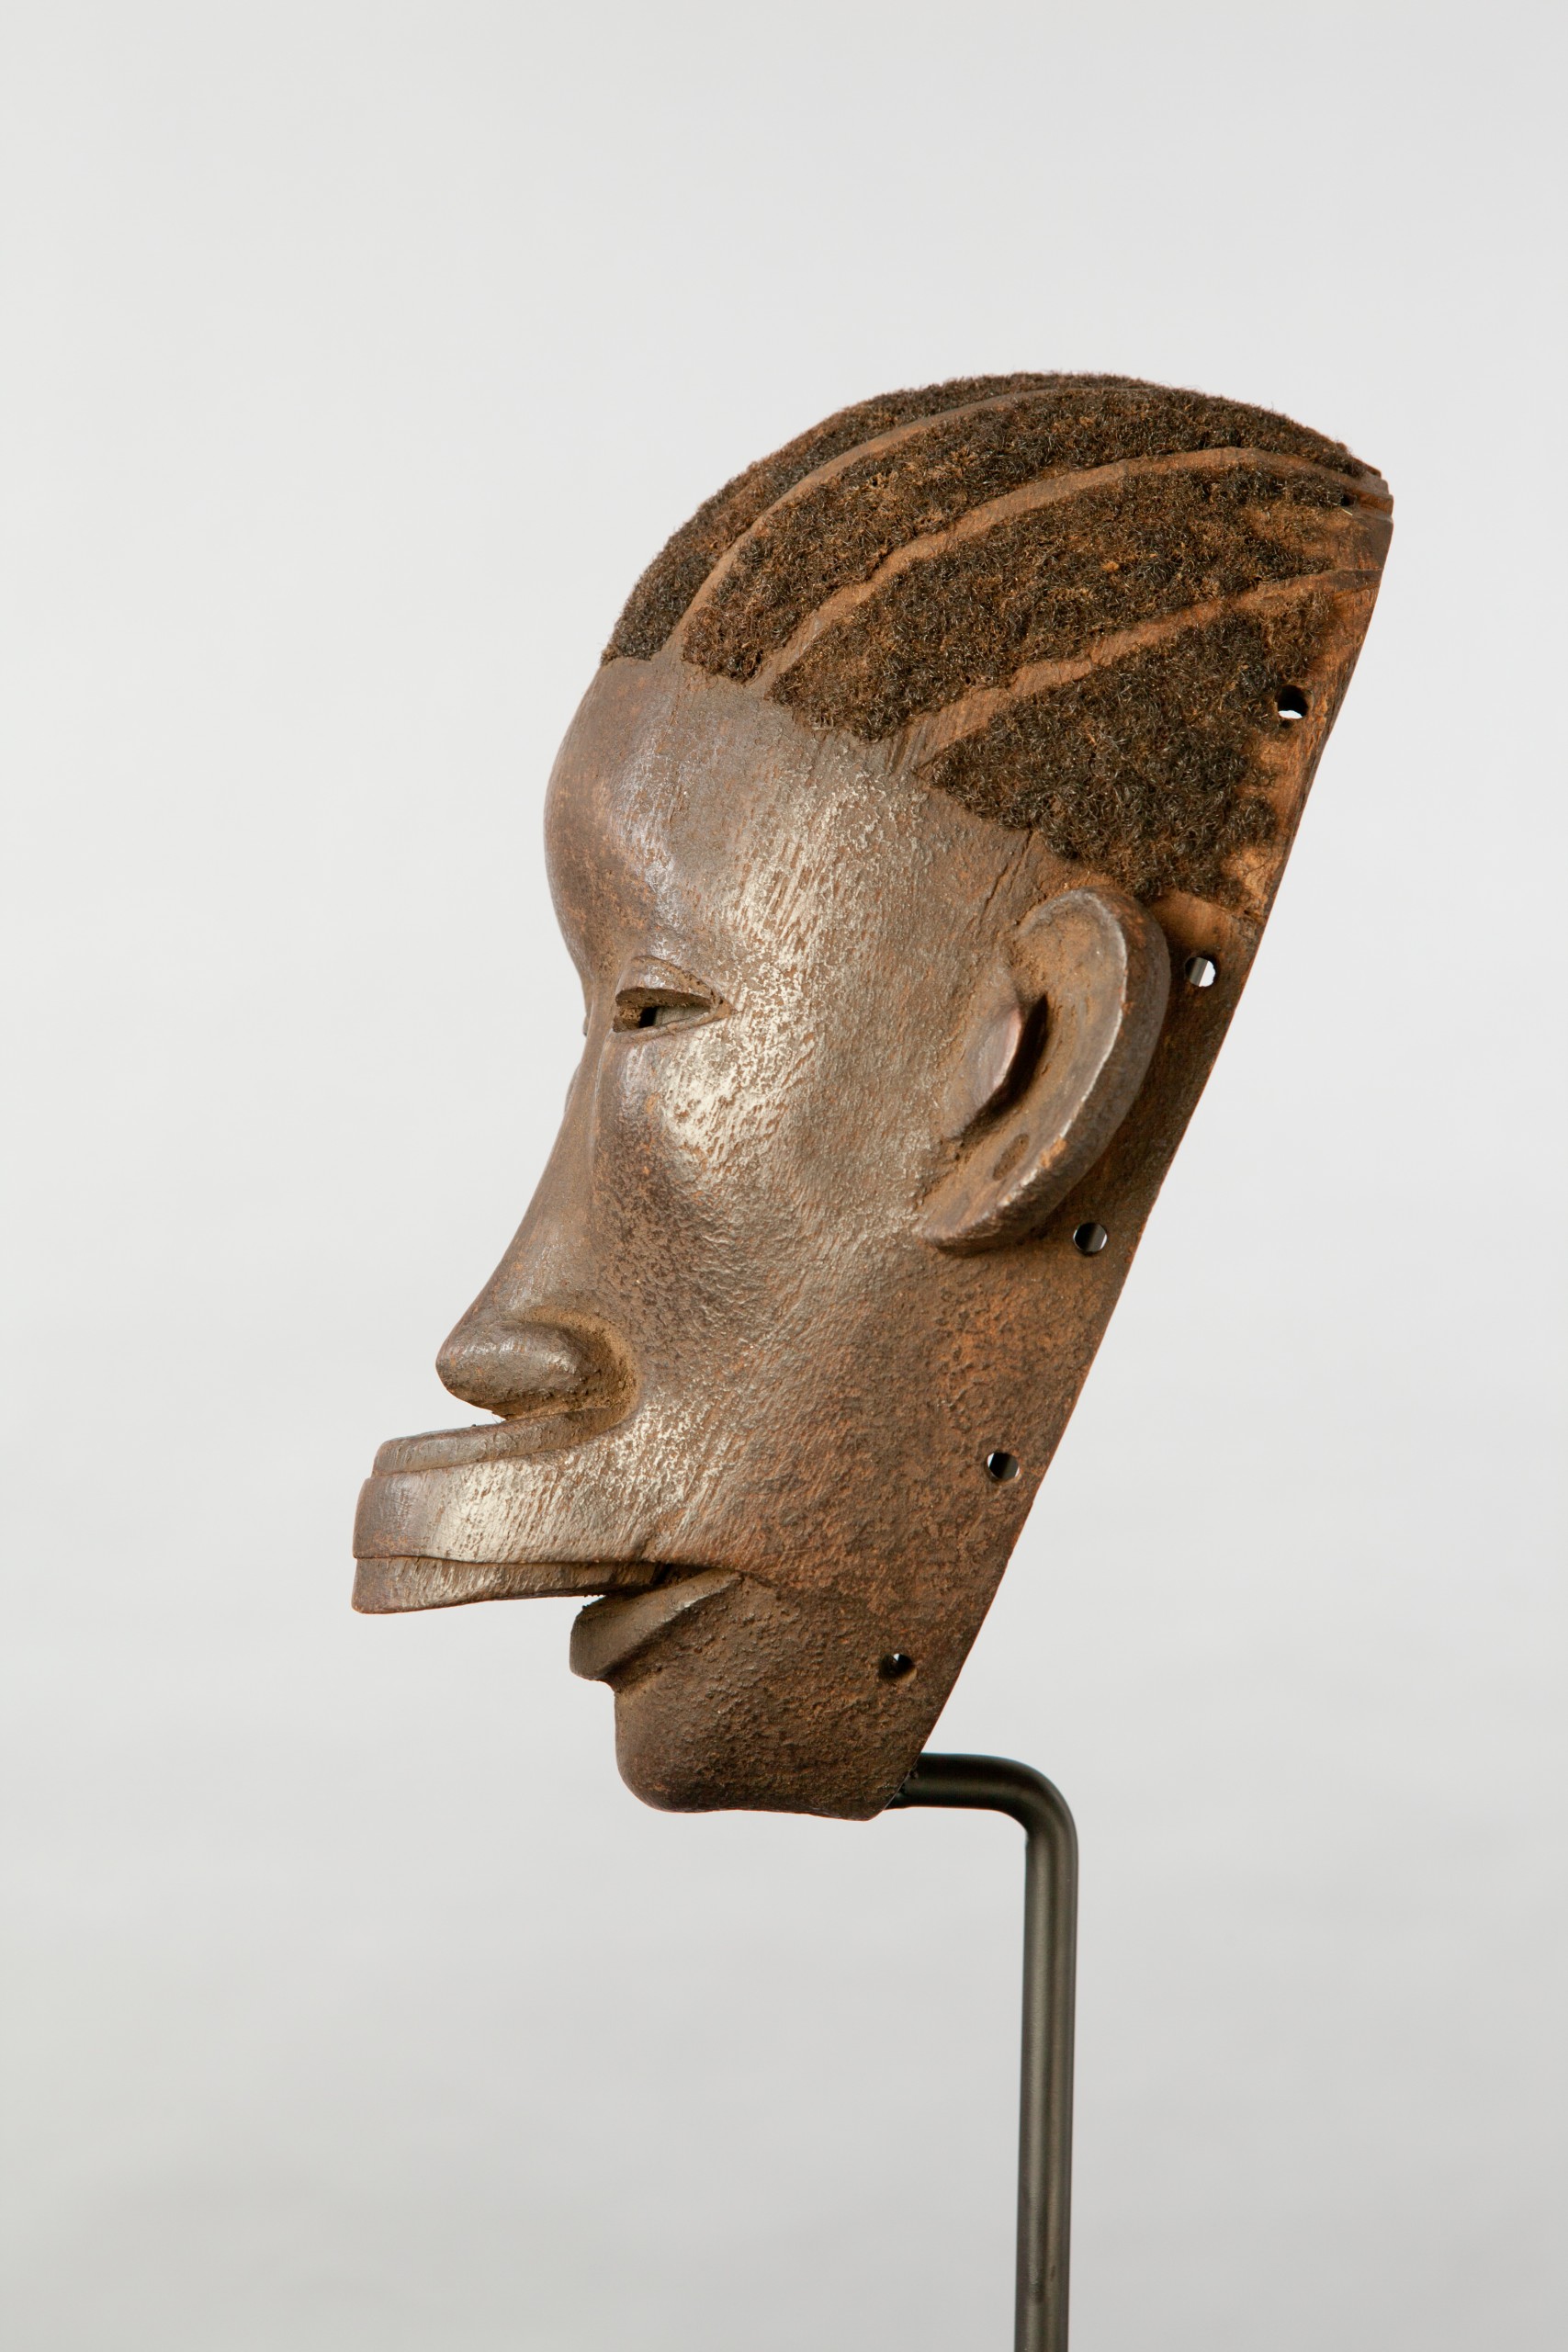 African artifacts part of the collection on display at the Mortvedt Library likomba-mask